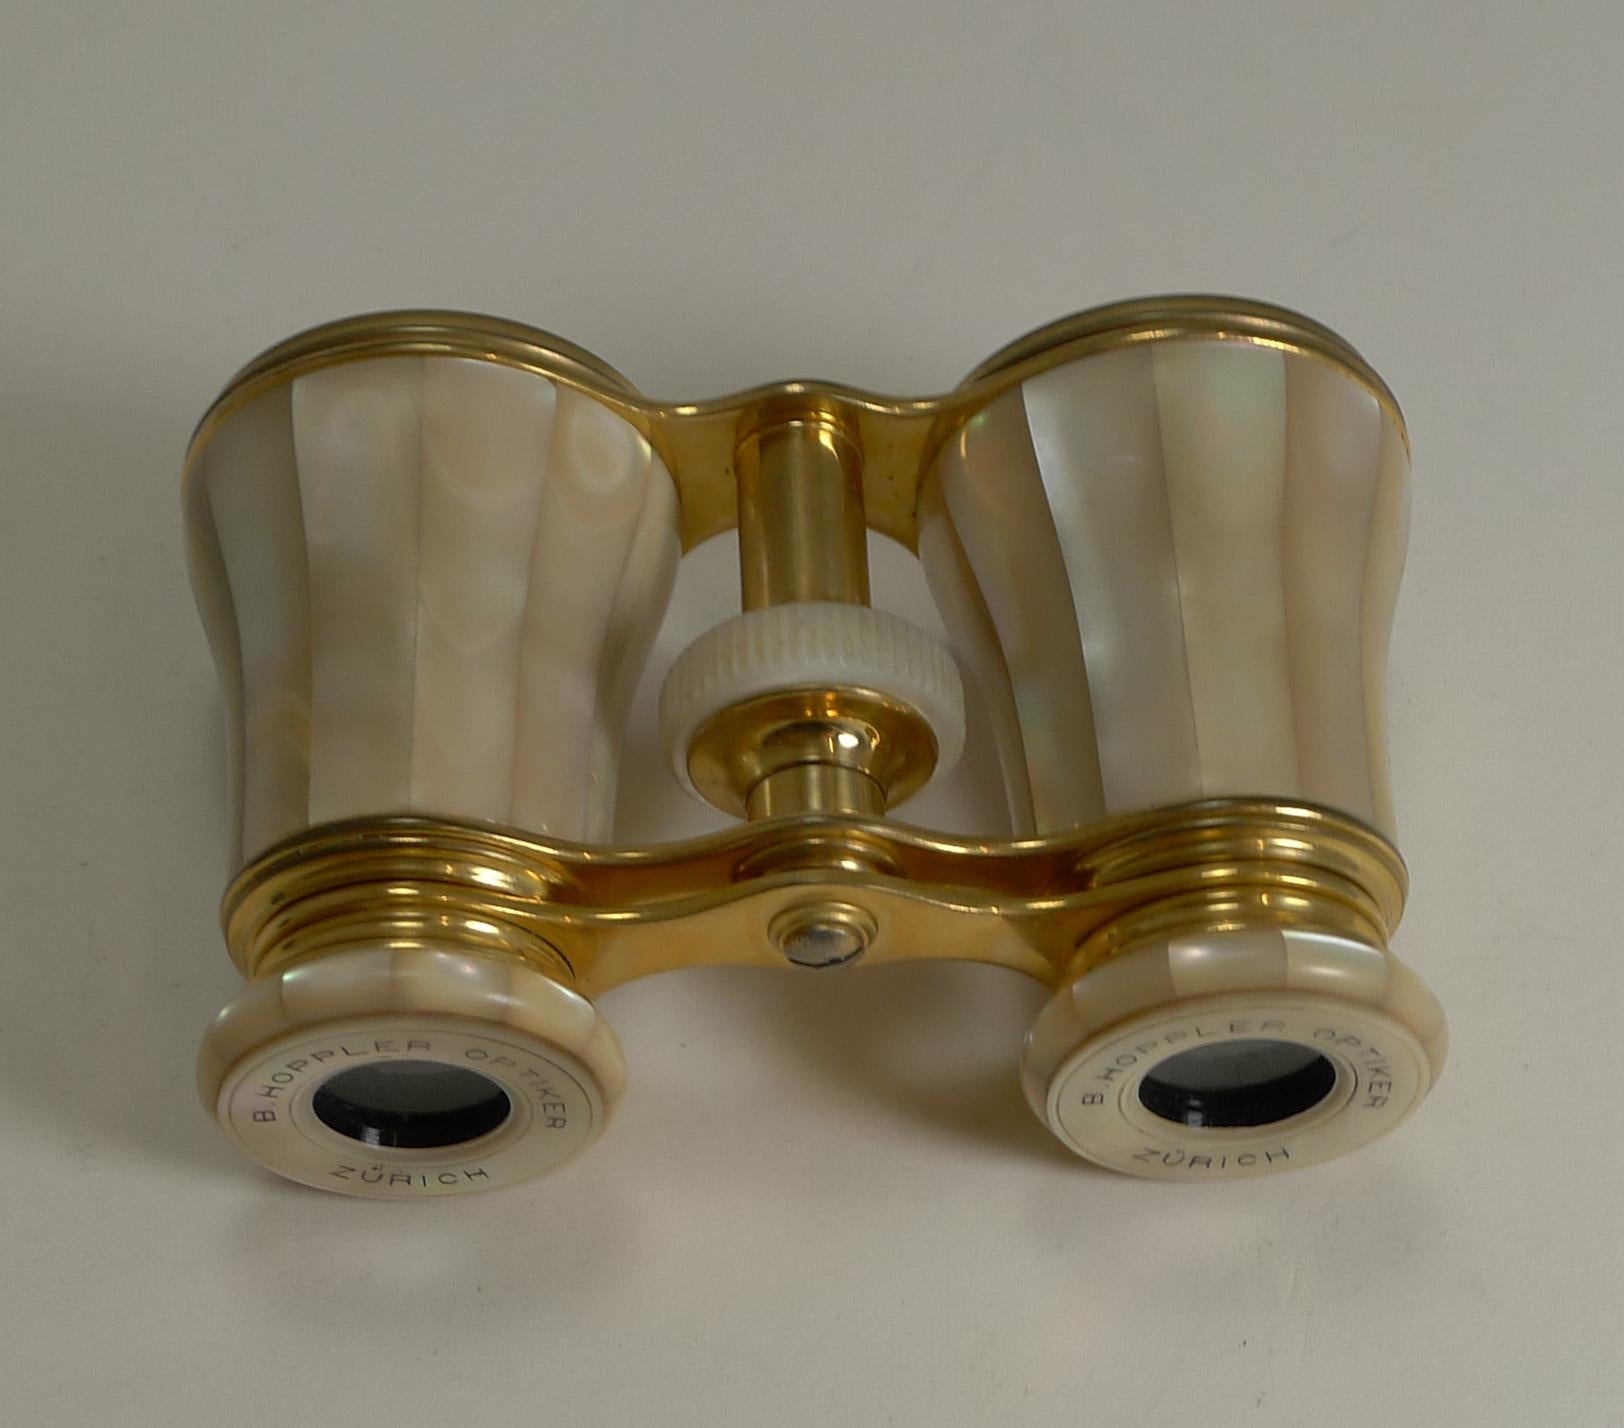 French Pair of Antique Mother of Pearl Opera Glasses by Lemaire, Paris circa 1890